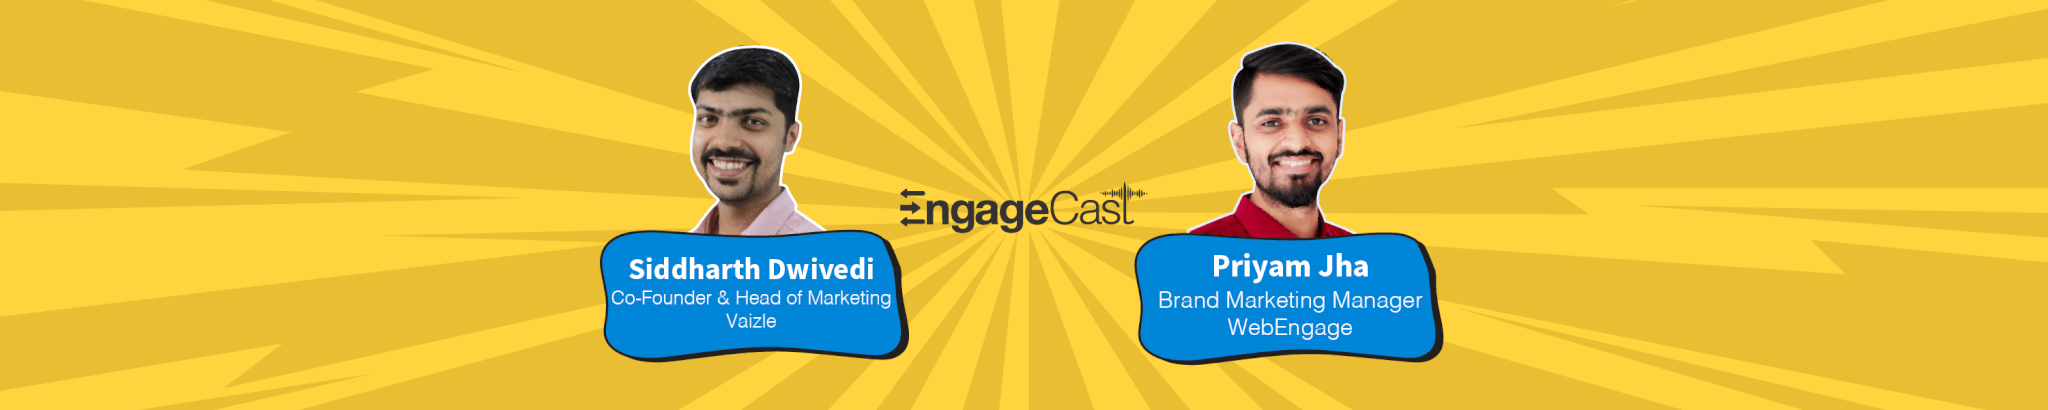 Episode 13: Rewriting the Marketing Playbook for 2020 & Beyond | Siddharth Dwivedi